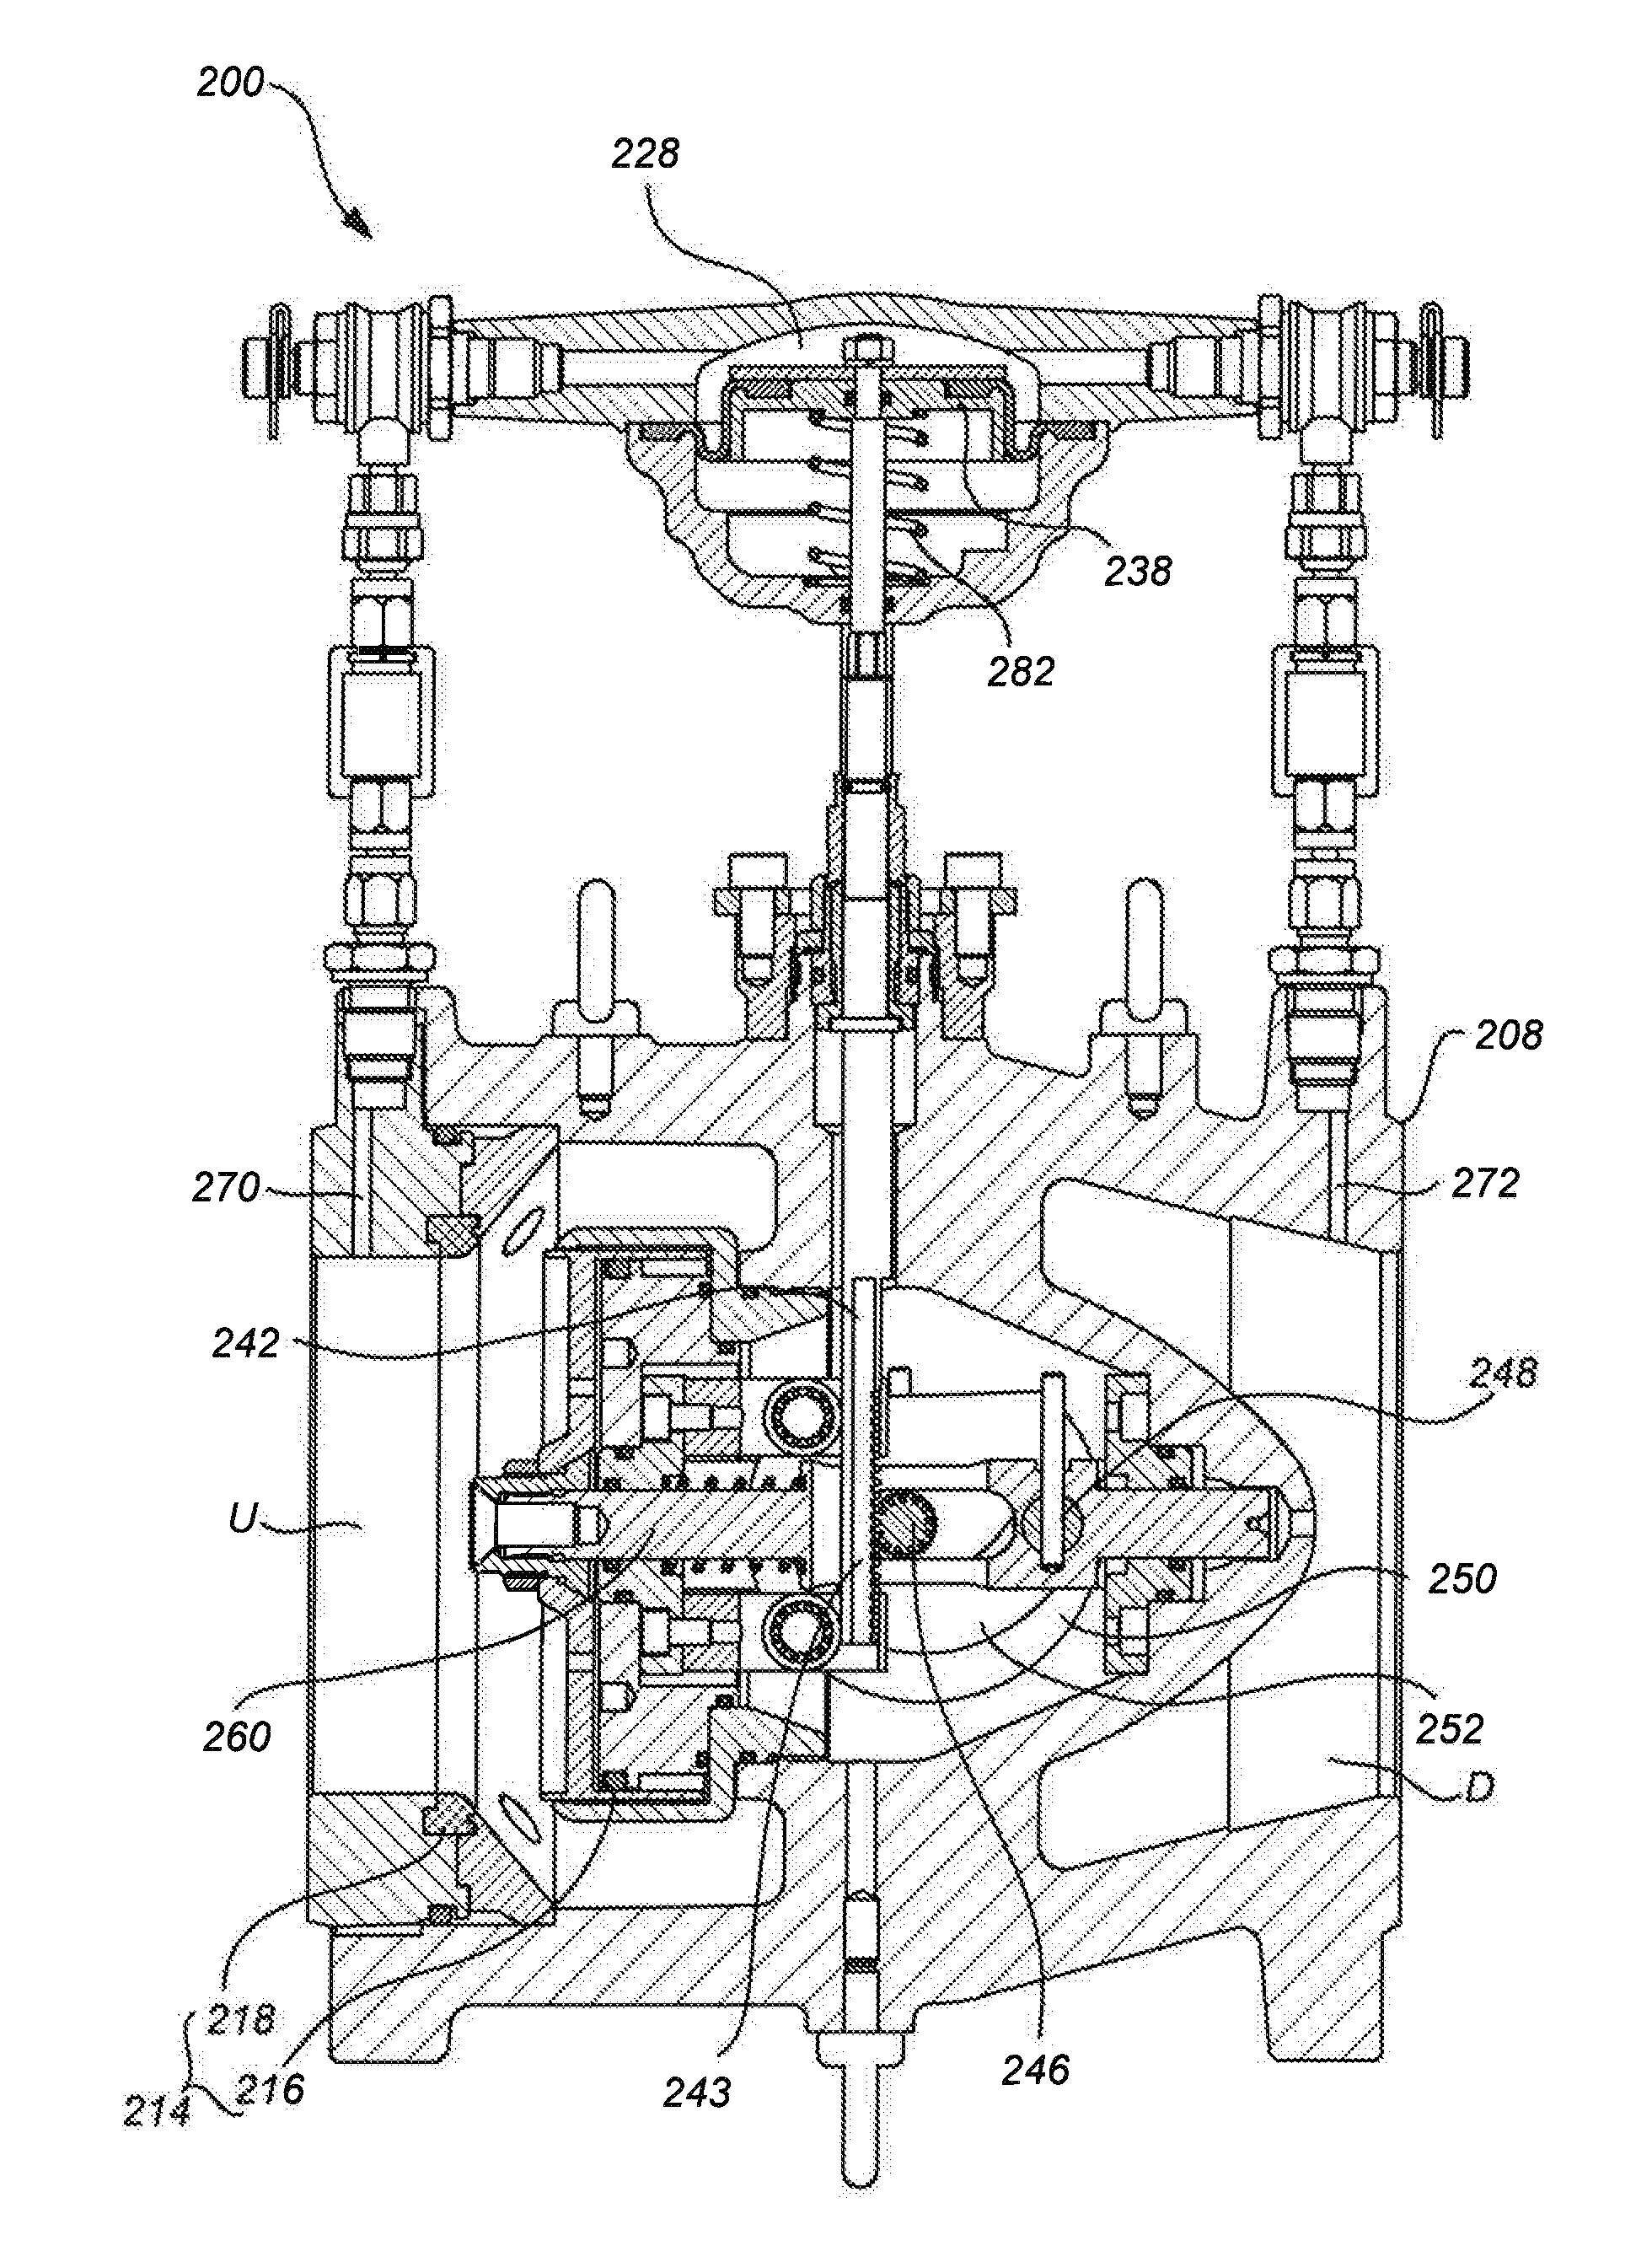 A valve and a method of controlling a valve in a fluid conduit